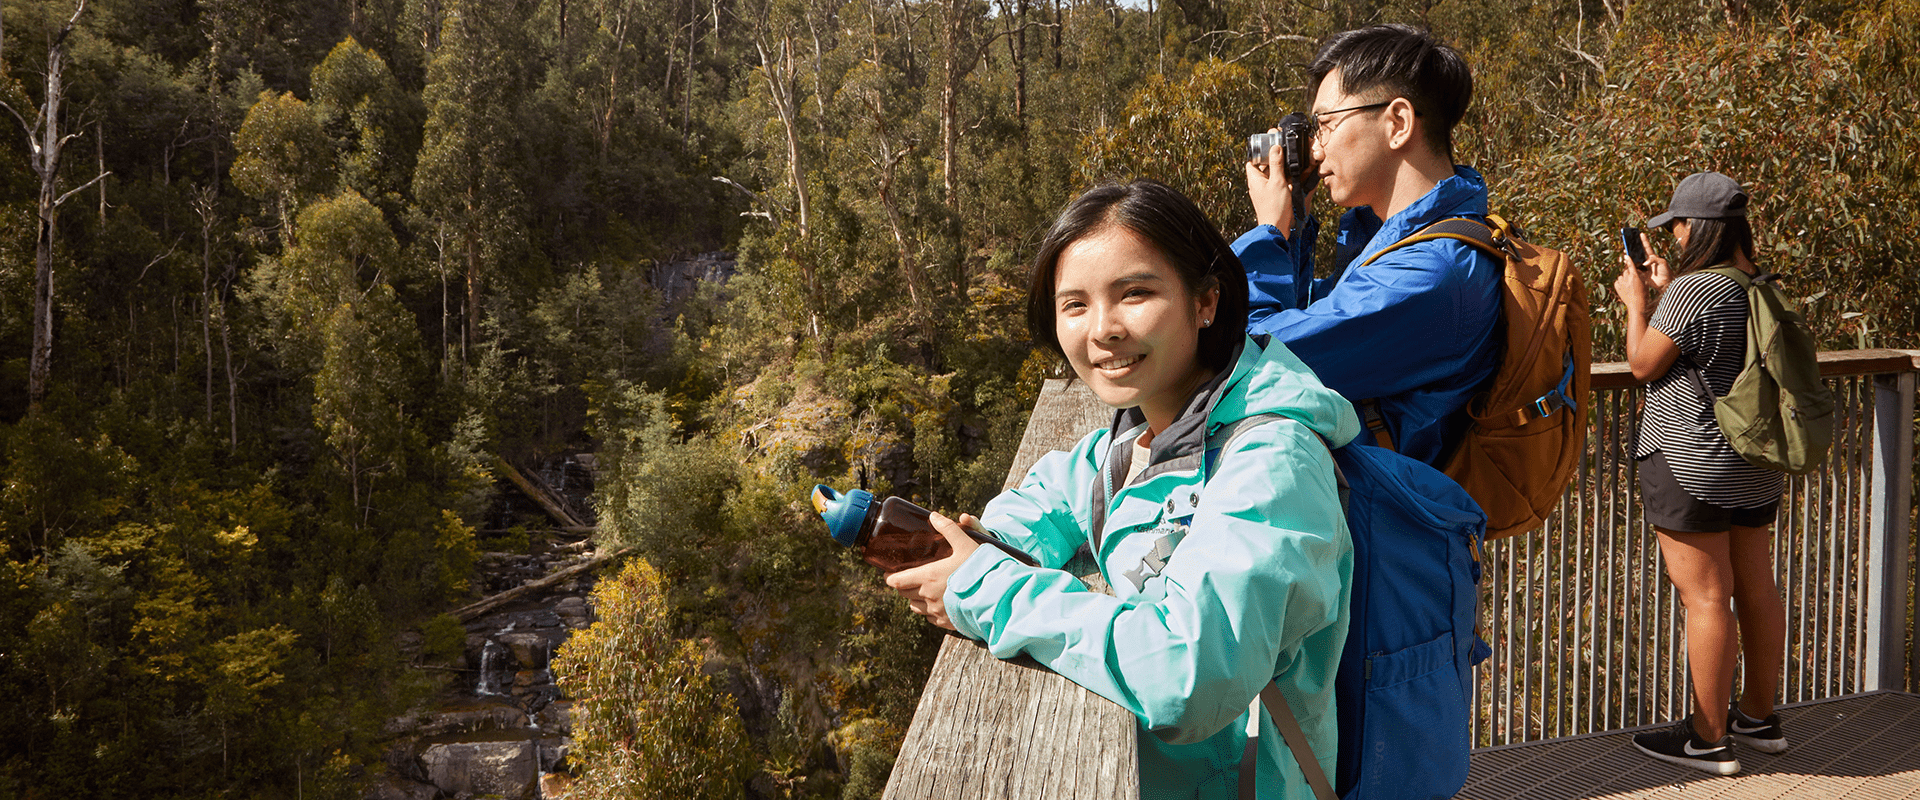 A group of people standing on a wooden viewing platform looking out towards a large waterfall surrounded by tall Eucalyptus trees. A lady smiles at the camera while her partner takes a photo of the scene. 